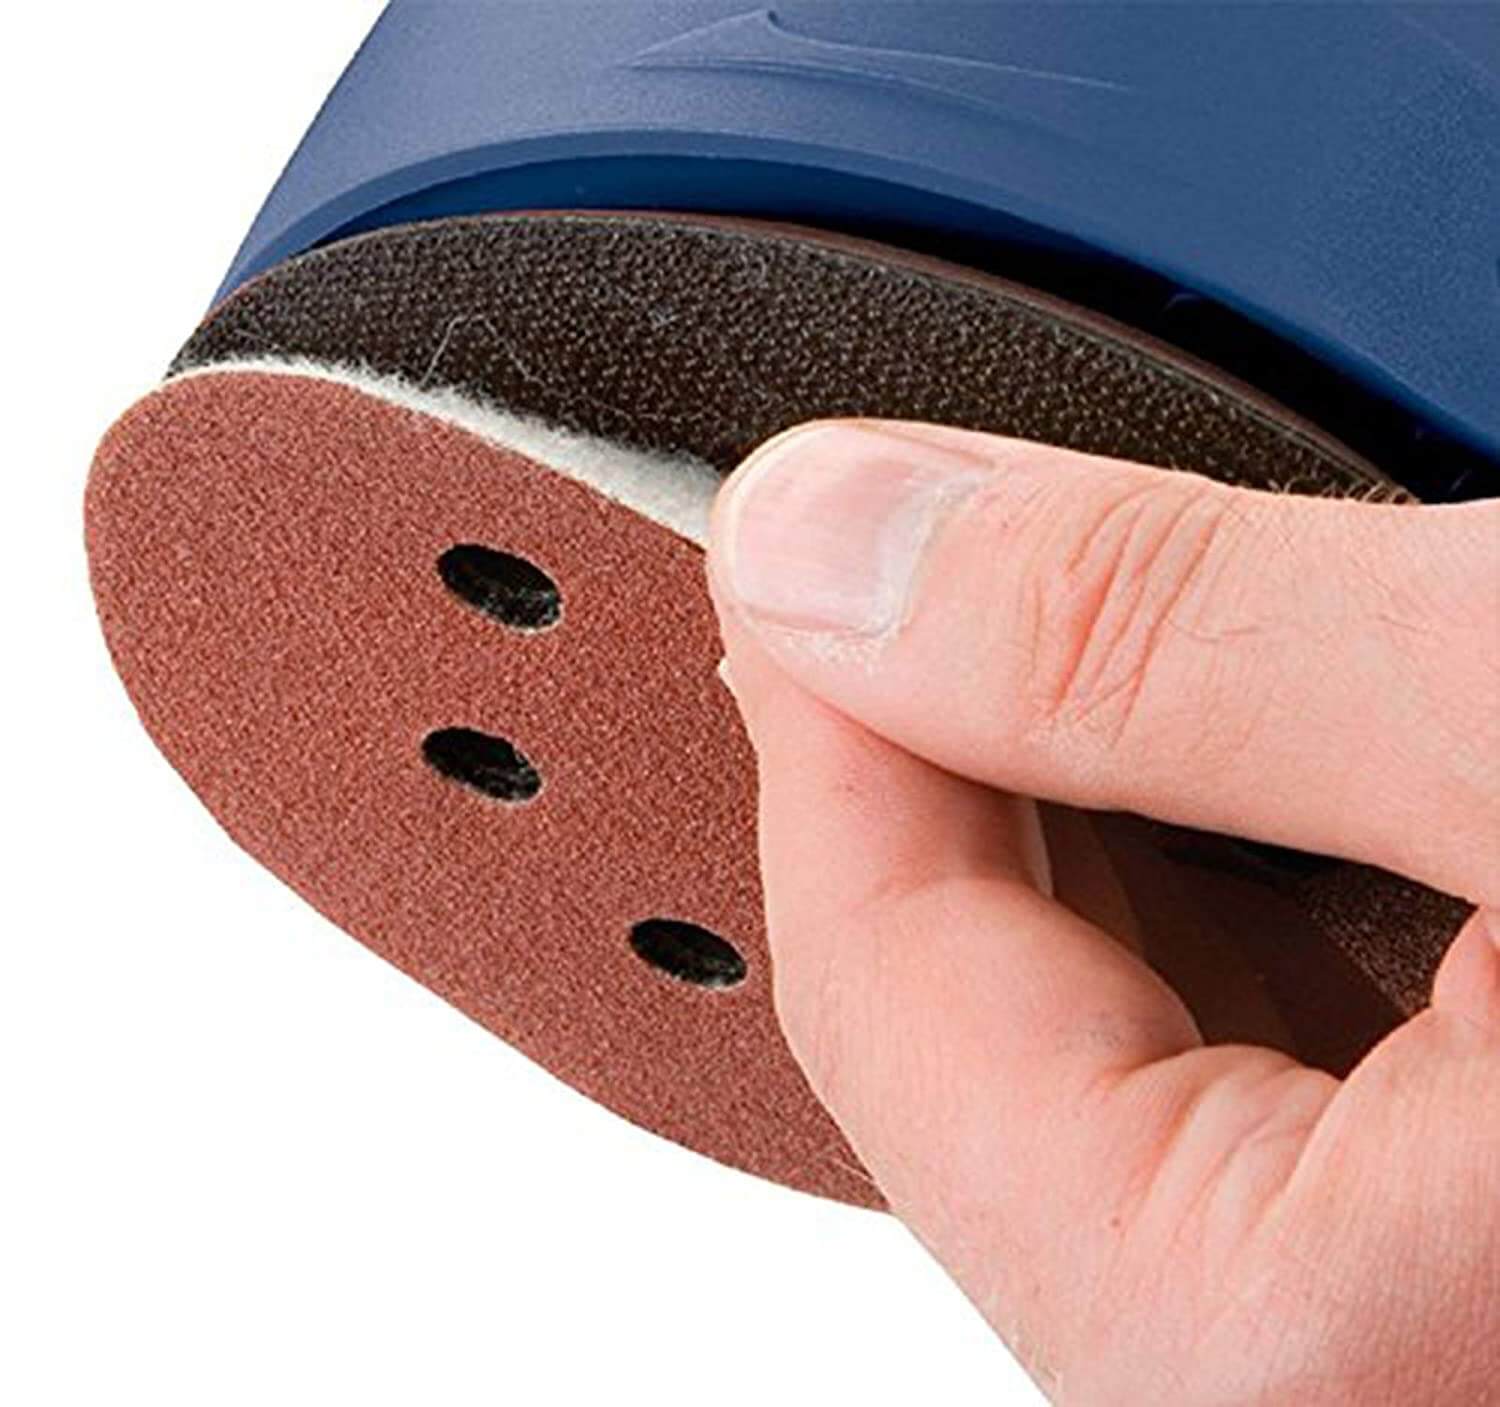 Miady 5-Inch 8-Hole Hook and Loop Sanding Discs